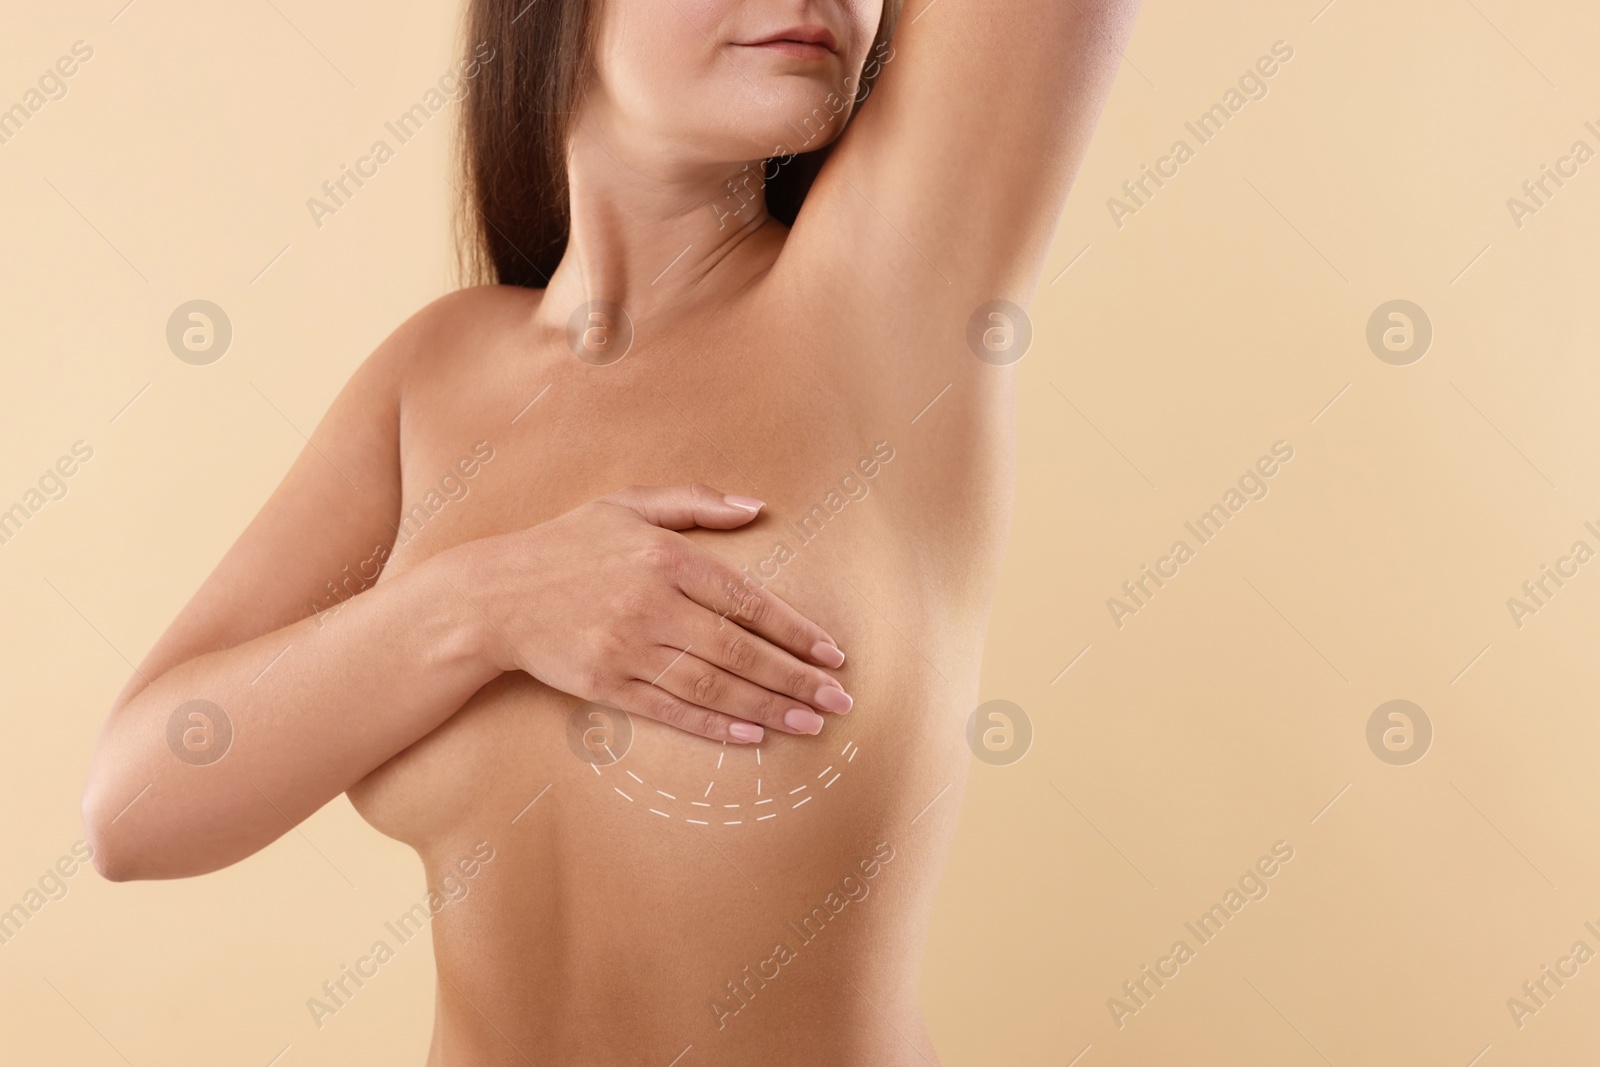 Image of Breast augmentation. Woman with markings for plastic surgery on skin against beige background, closeup. Space for text